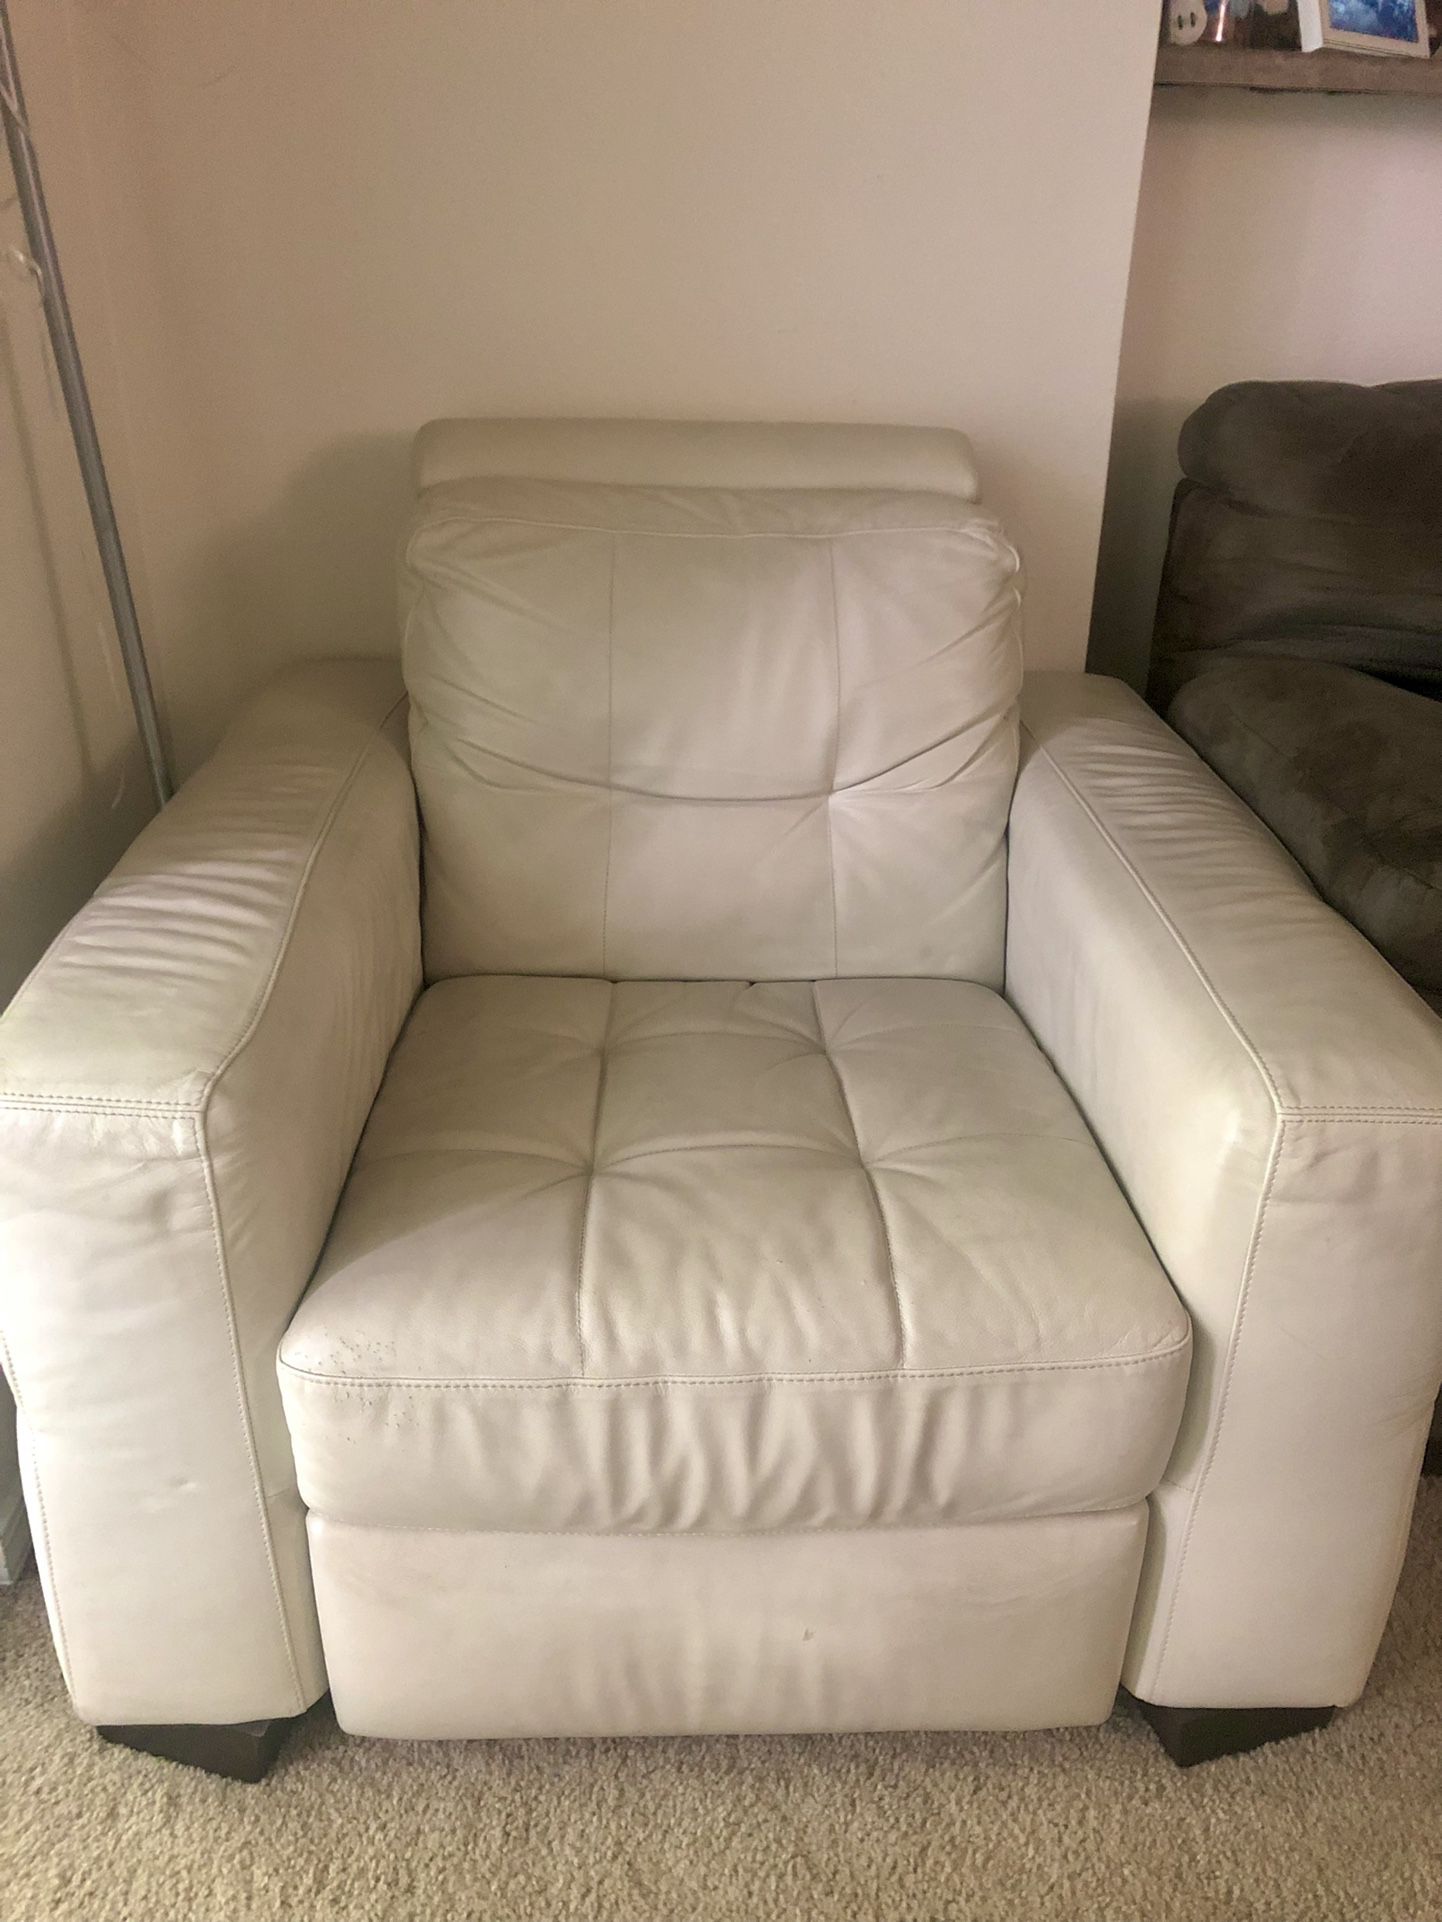 Single Seater White Leather Couch With a Headrest & Half Recline